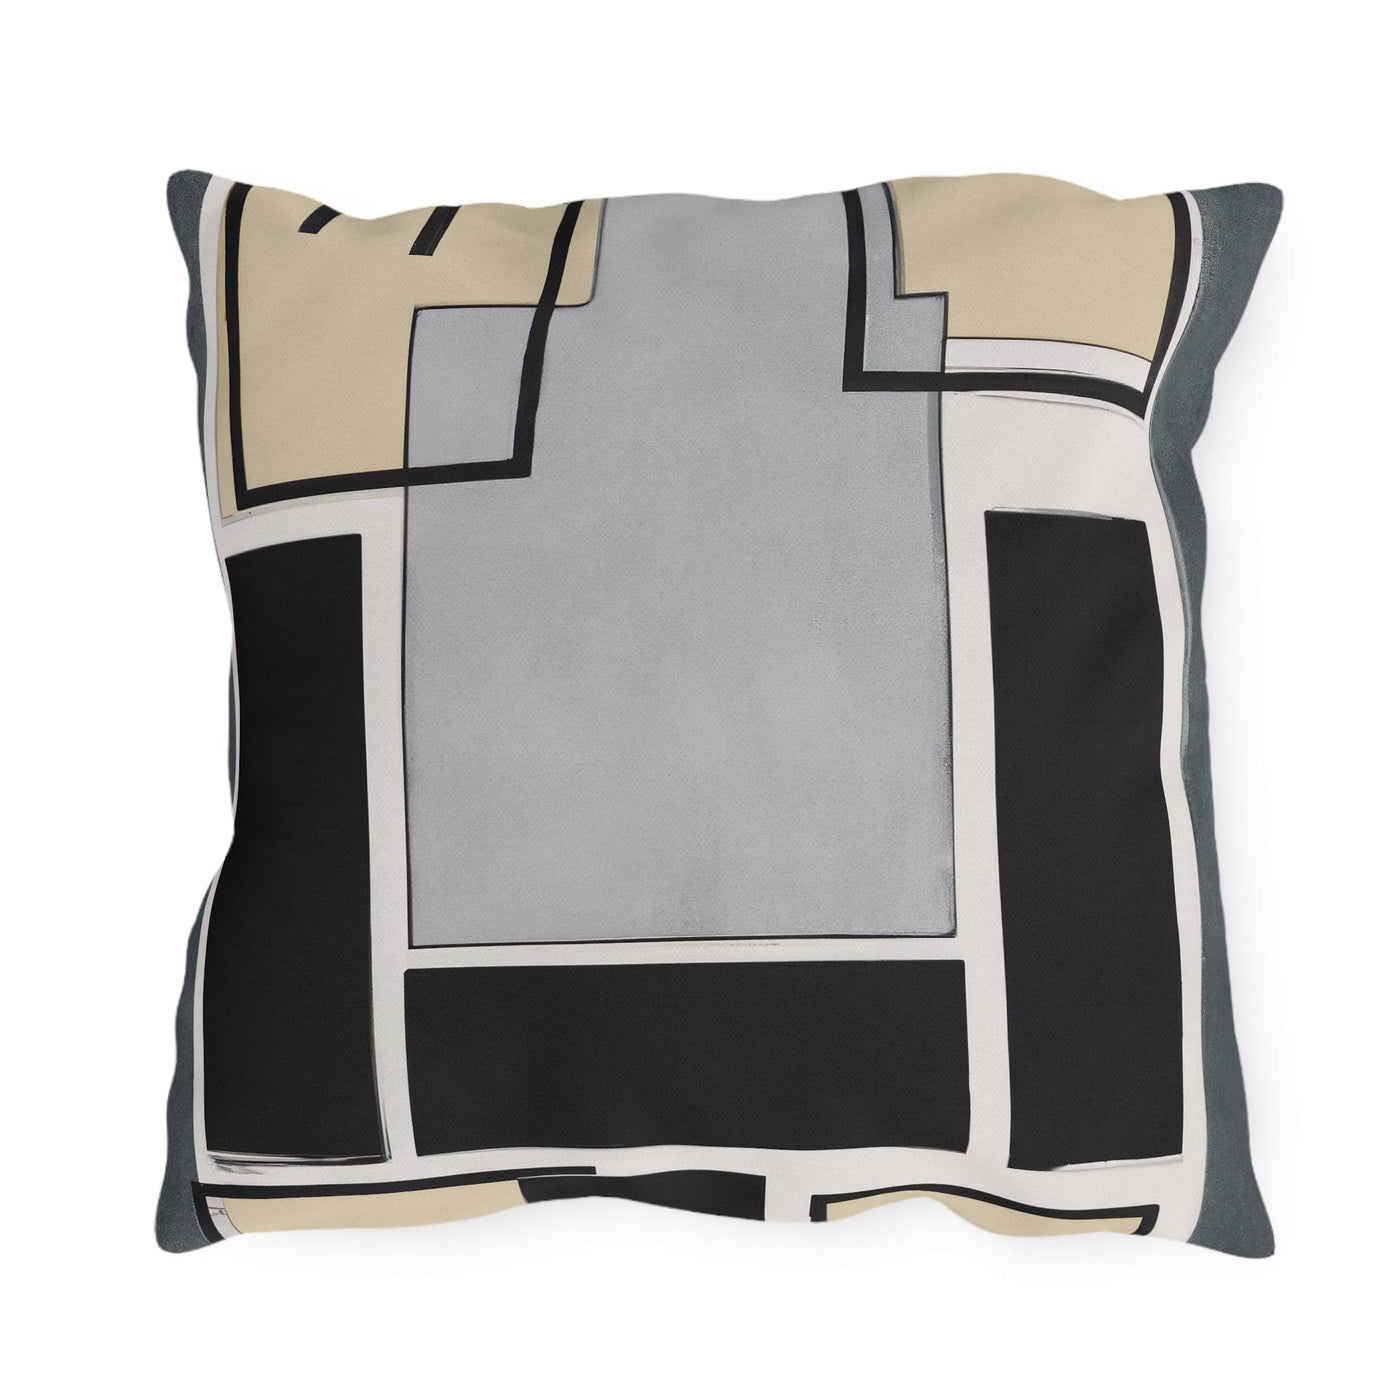 Decorative Outdoor Pillows With Zipper - Set Of 2 Abstract Black Grey Brown